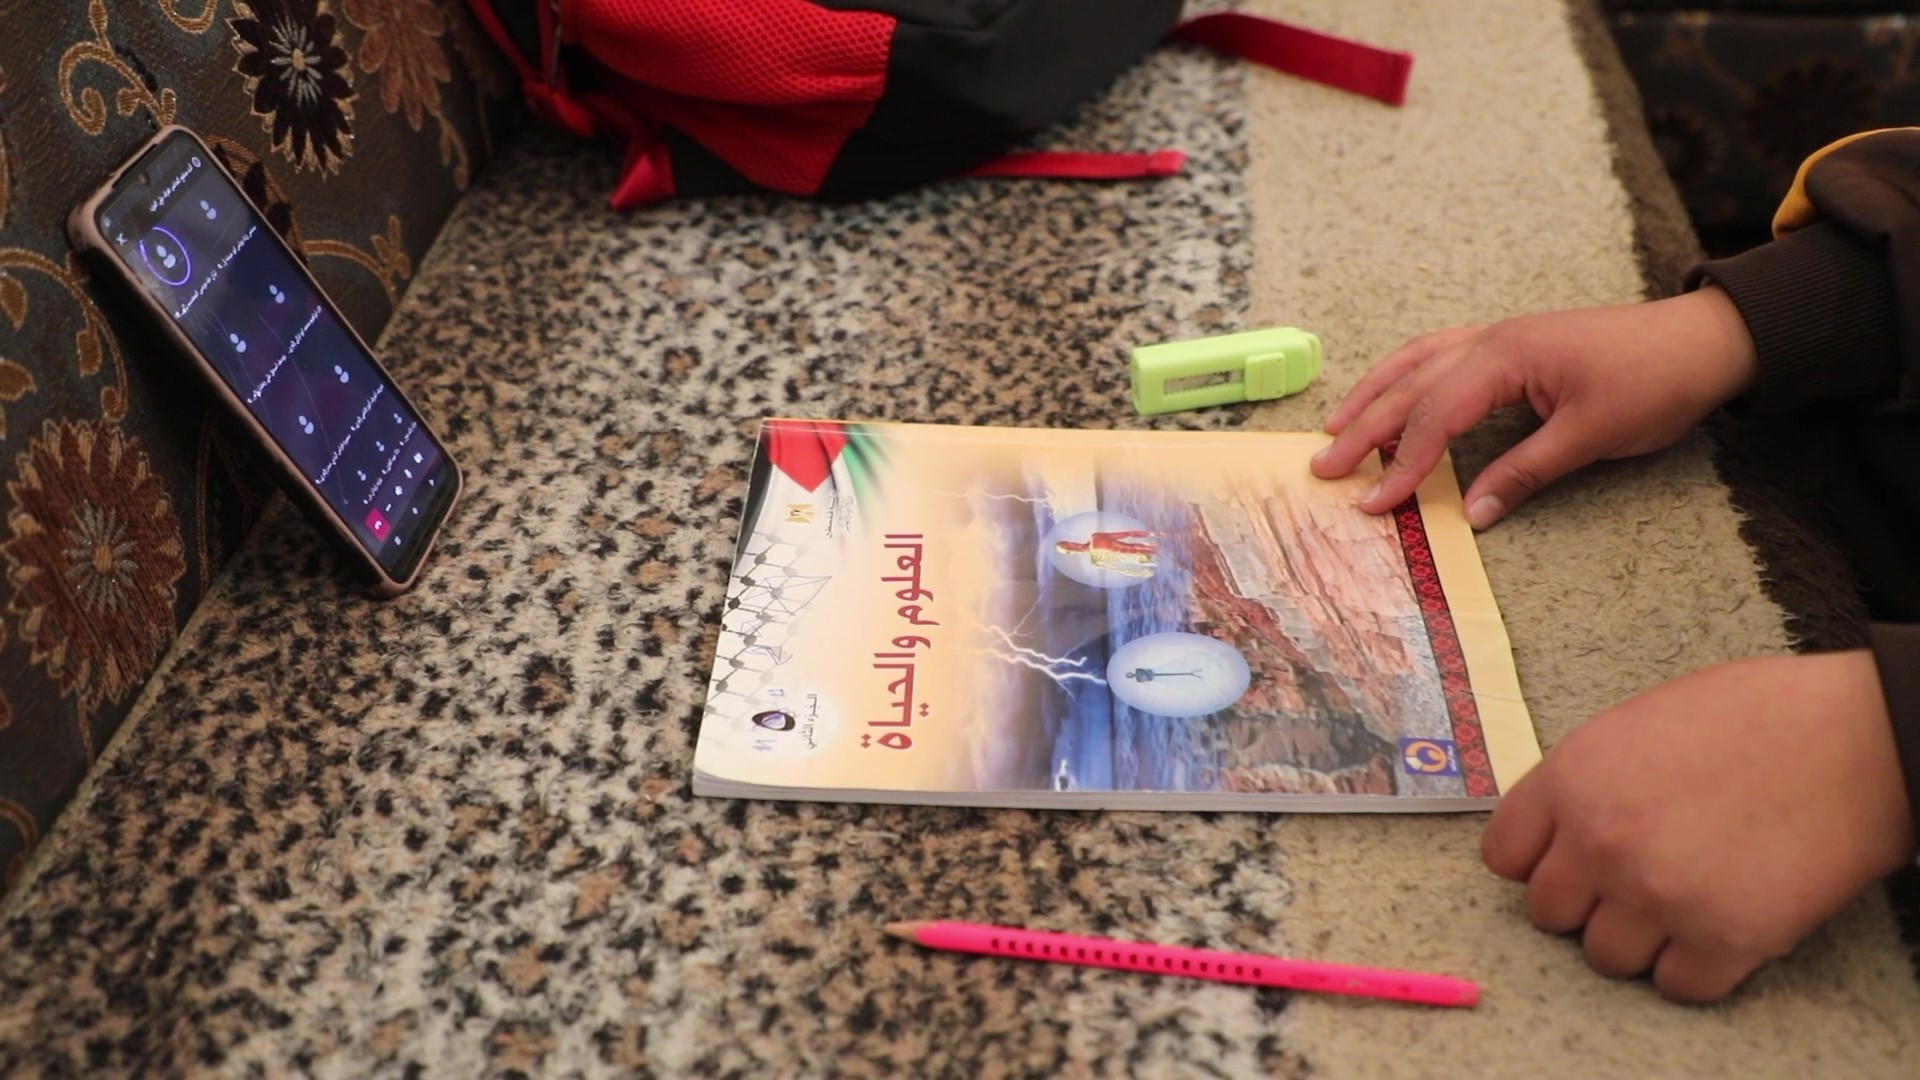 Pupils in four schools in Hebron, in the occupied West Bank, resort to distance learning after schools were forces to close their doors. (Mosab Shawer)